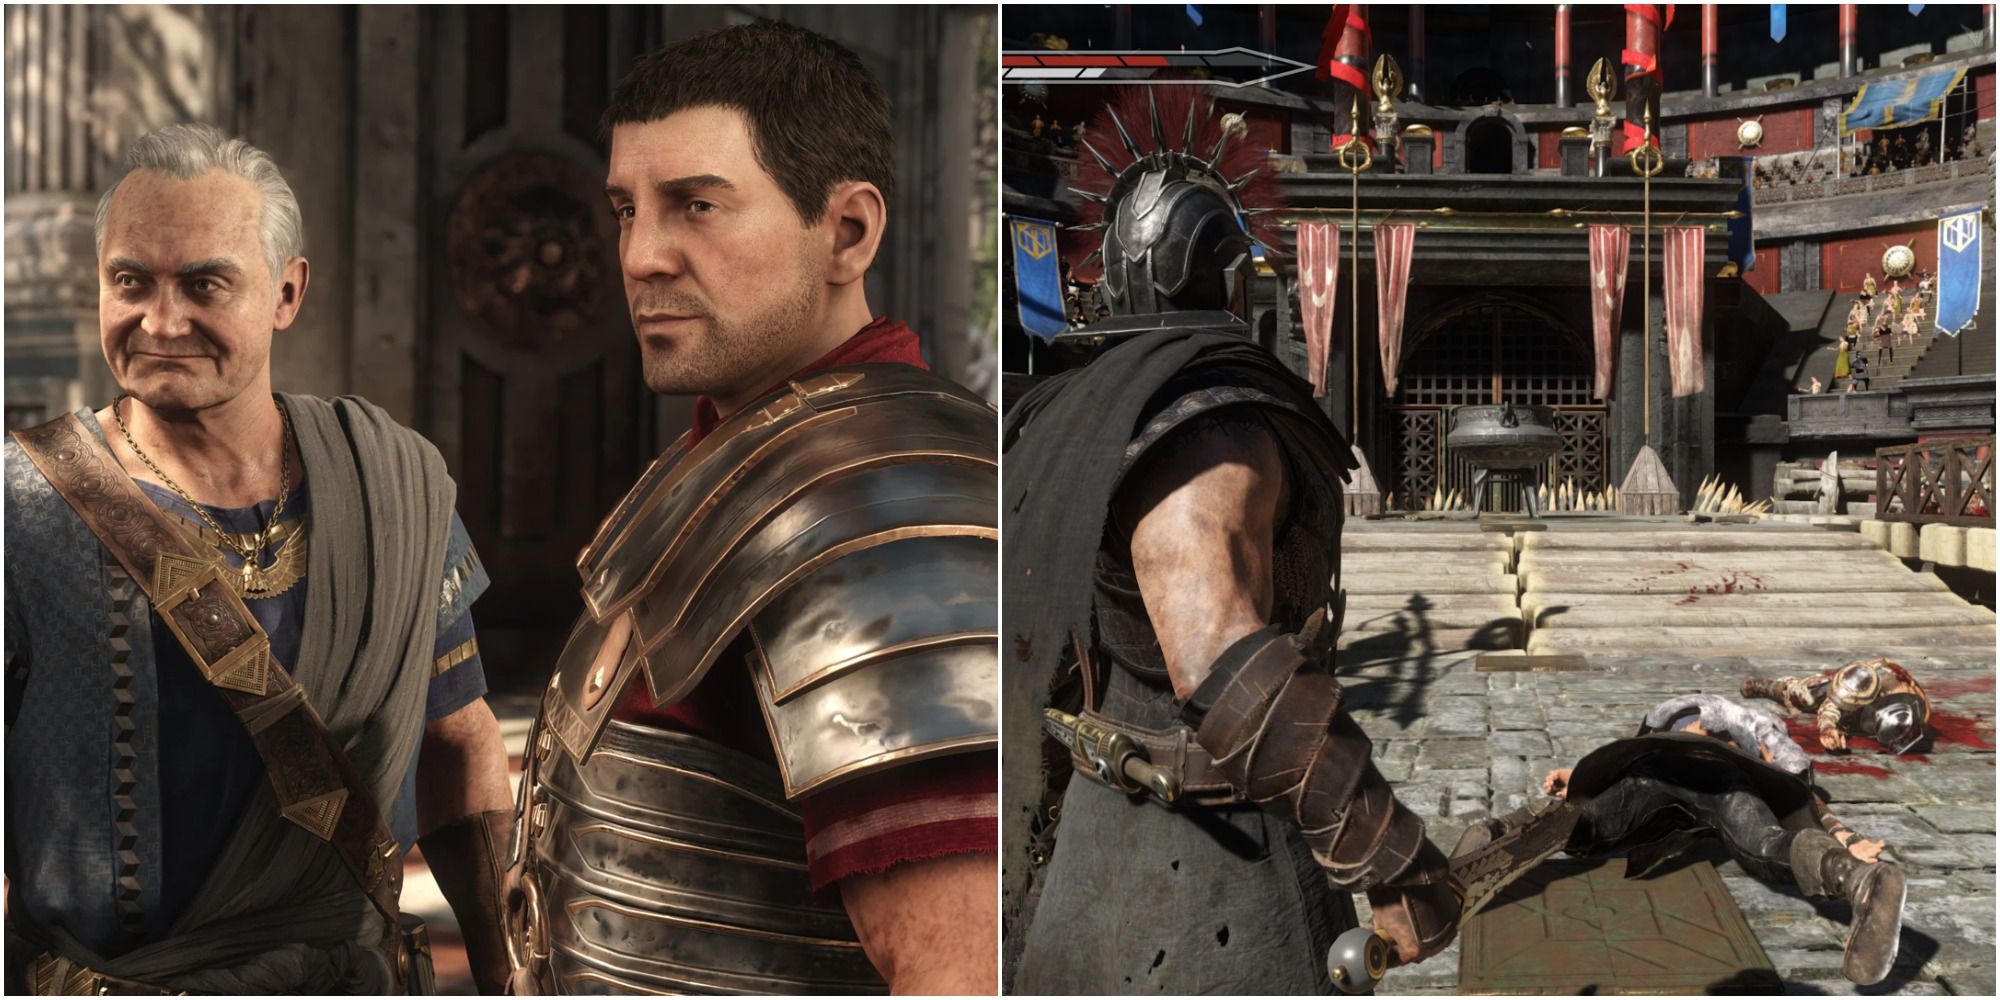 Ryse Son of Rome Marius Titus and his quest for vengeance